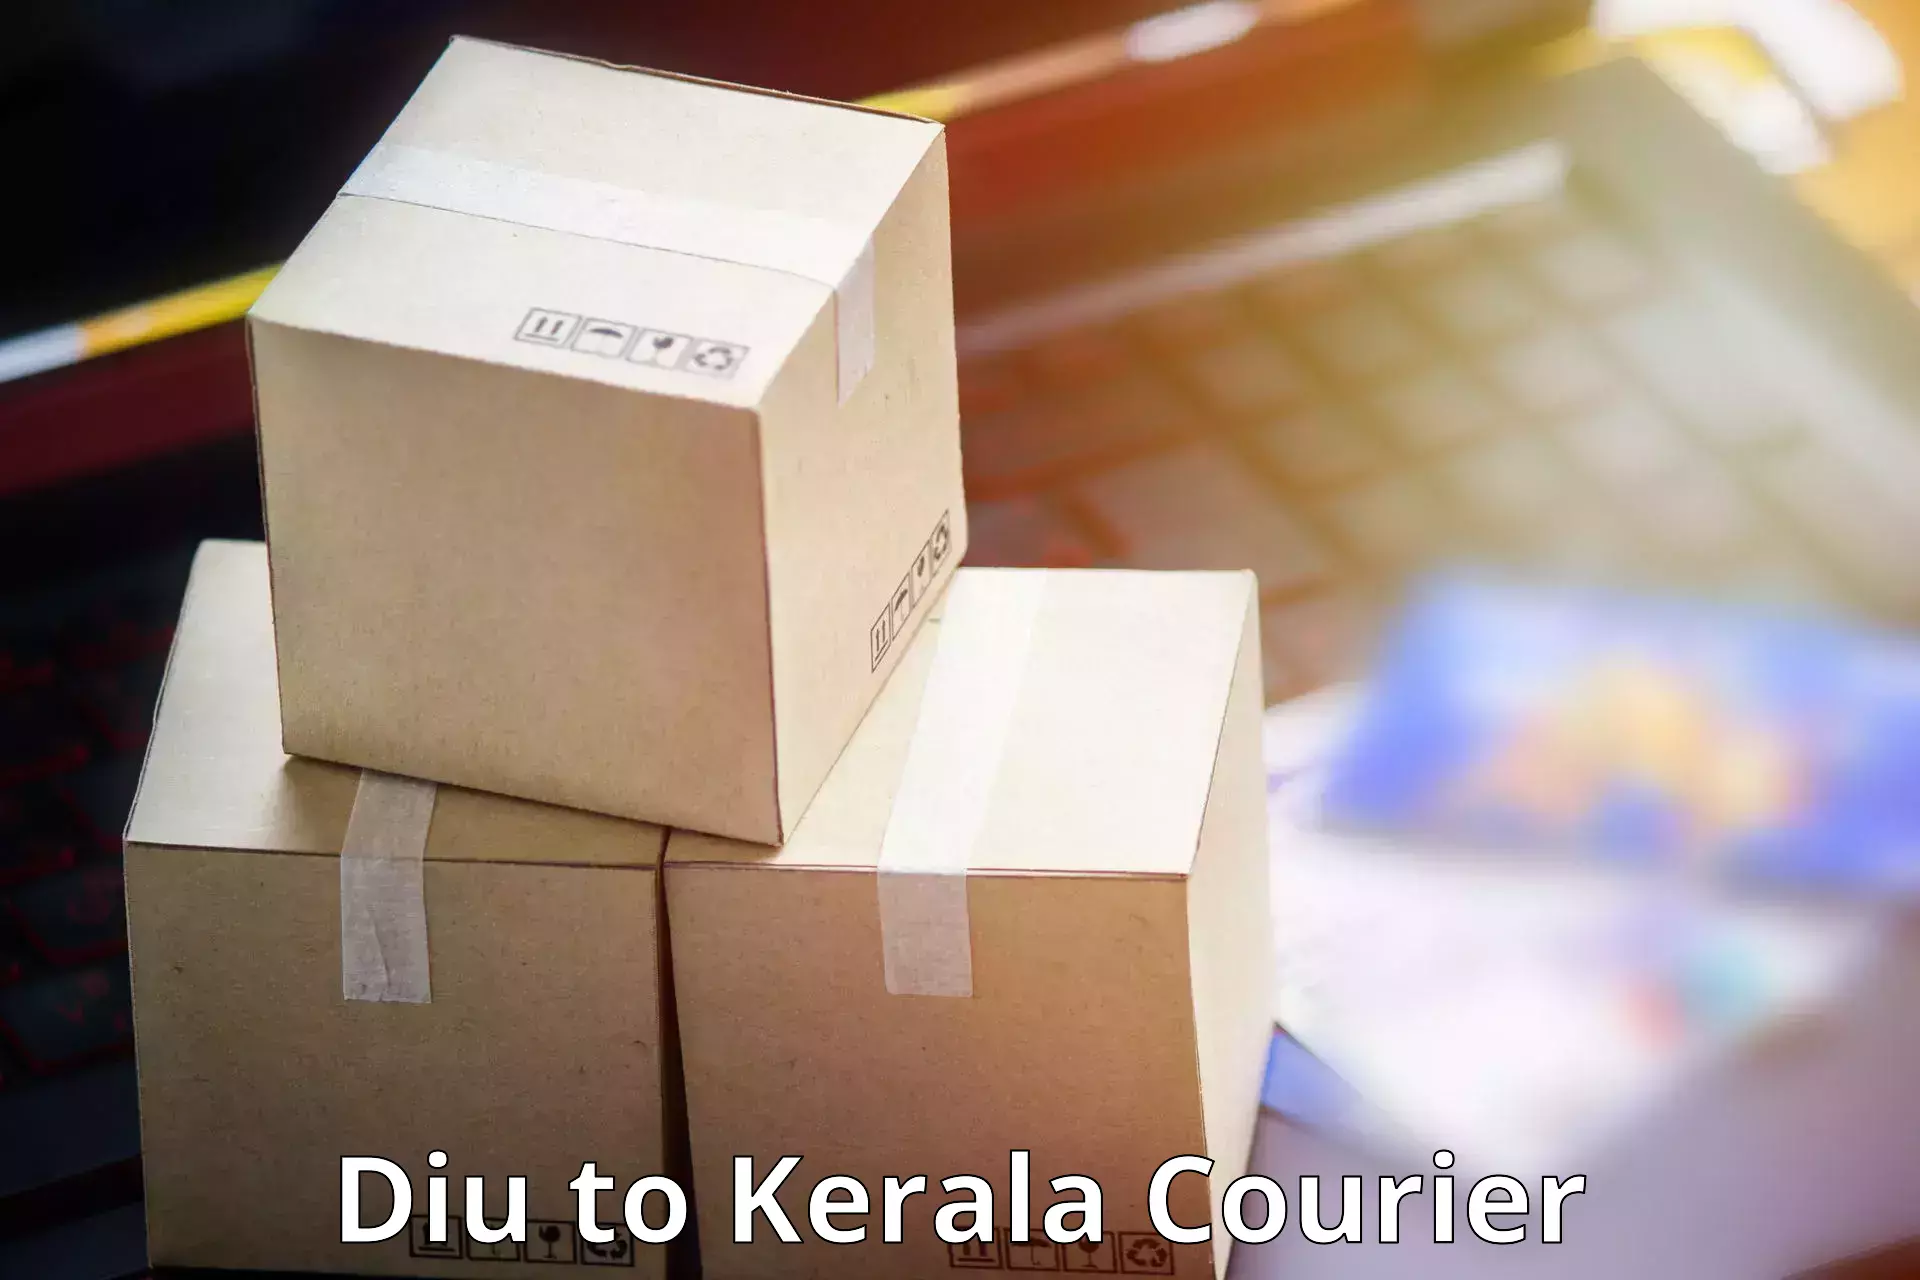 Courier service innovation in Diu to Kerala